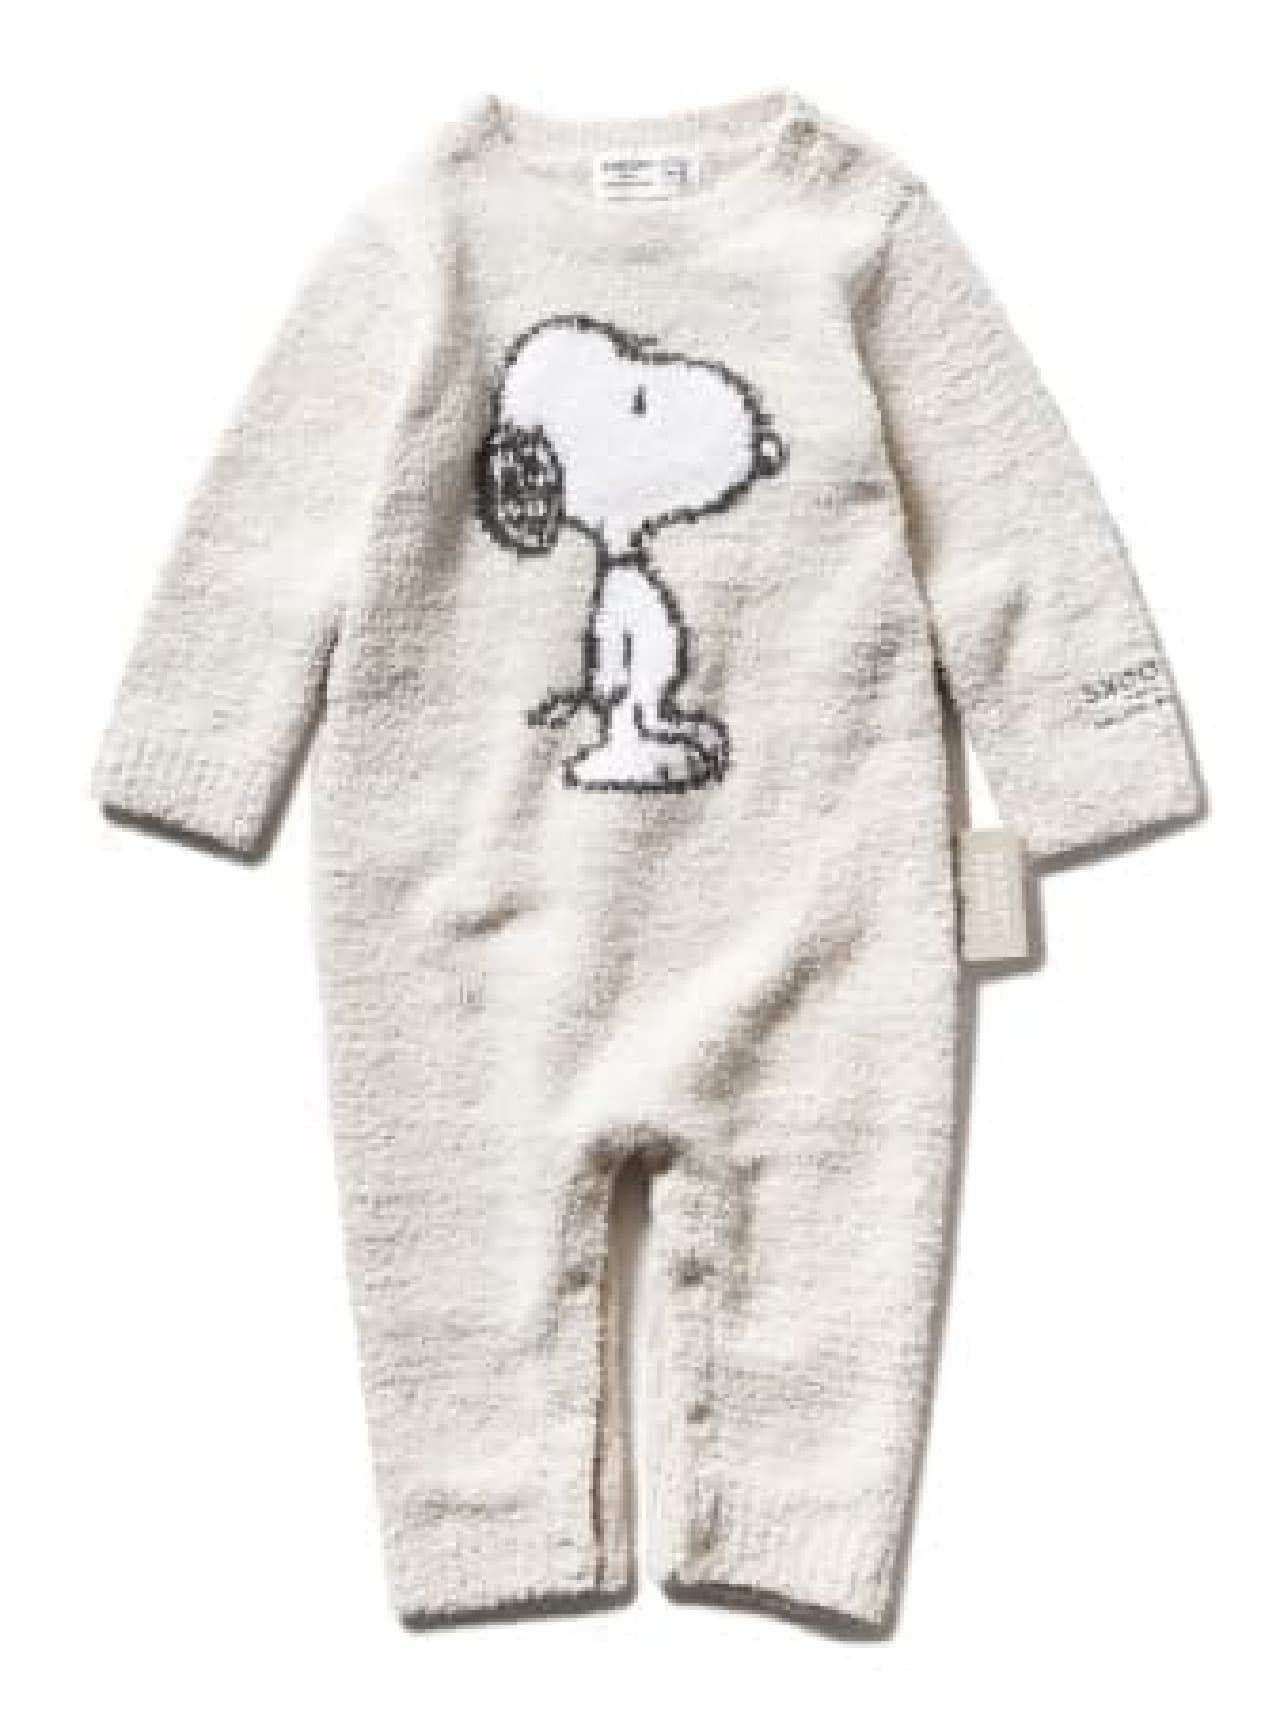 Gelato Pique collaborates with PEANUTS--cute Snoopy roomwear and stuffed animals